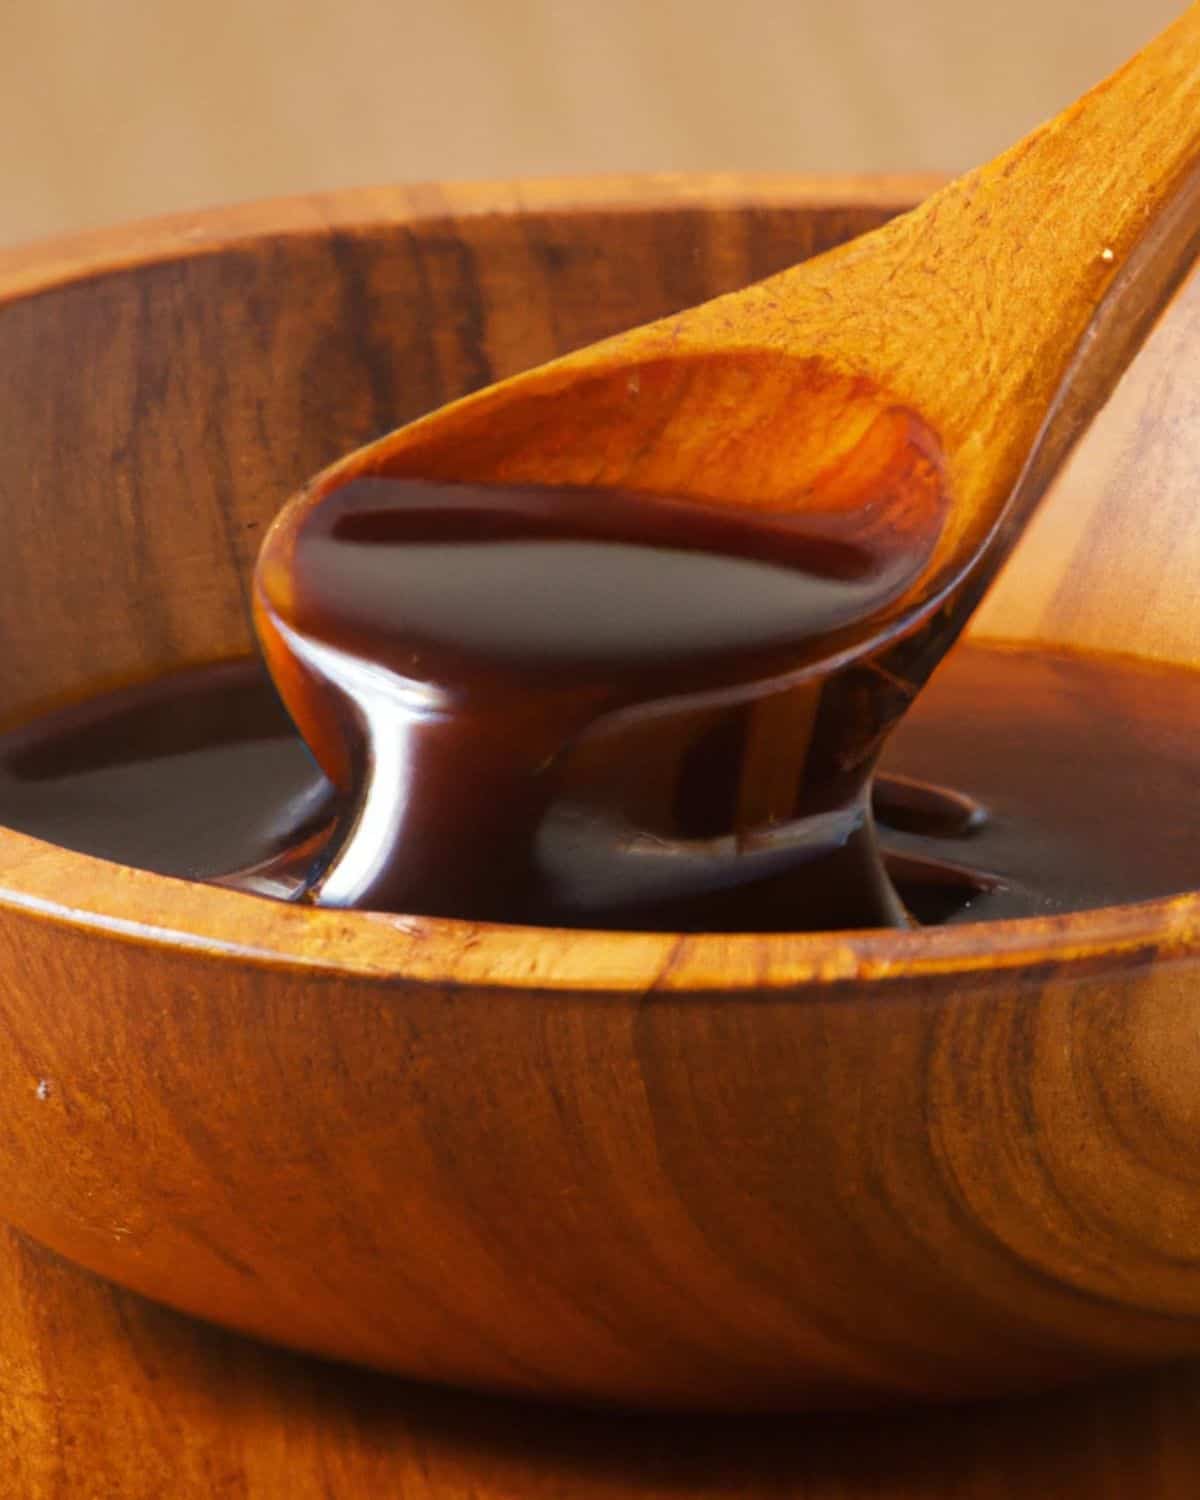 Kecap manis in a wooden bowl with a wooden spoon.